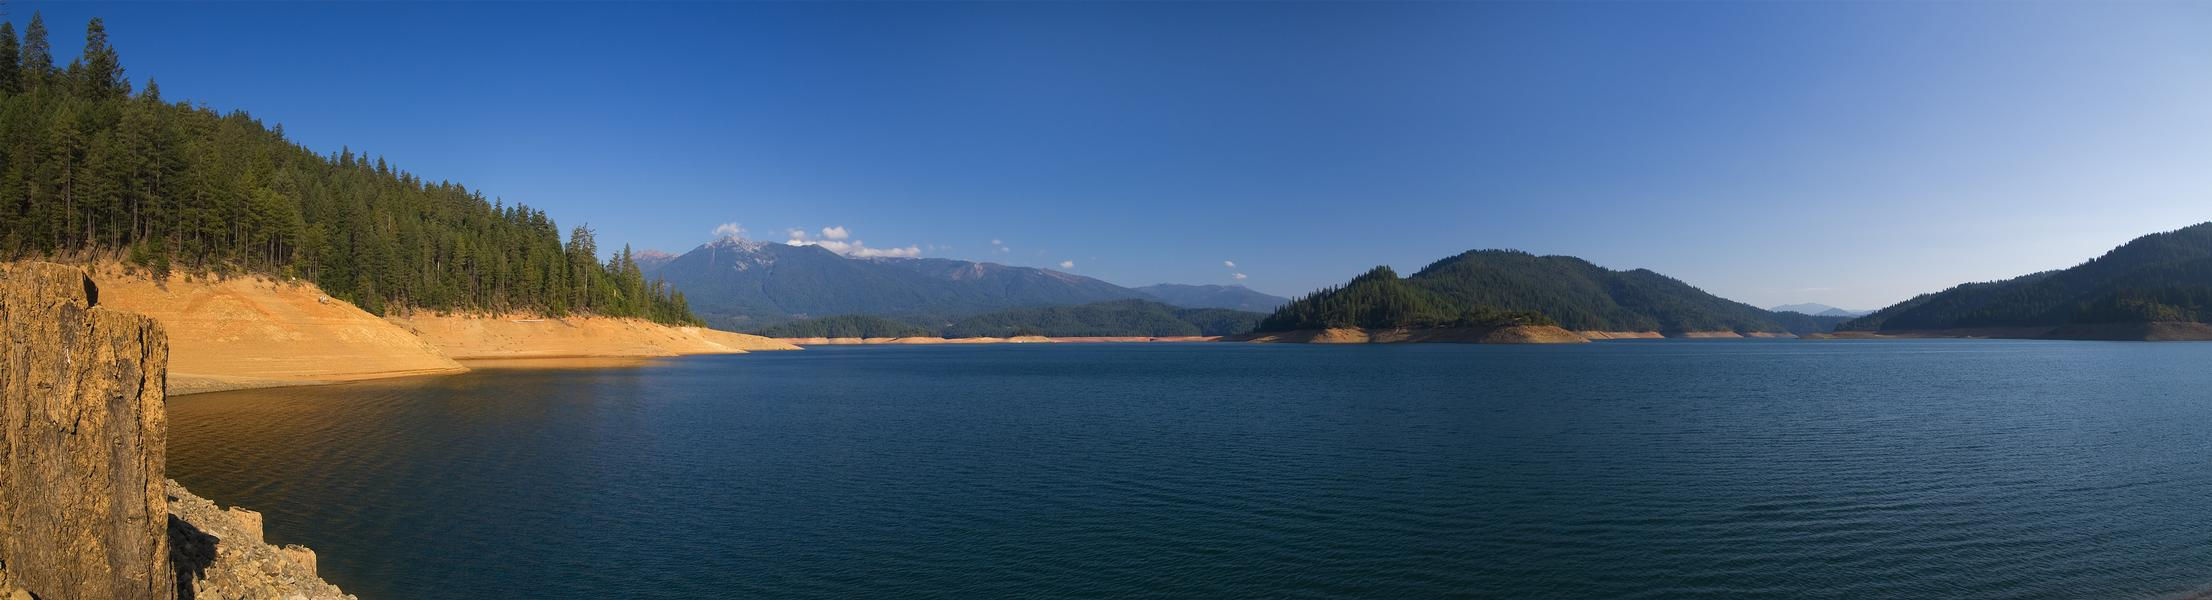 Trinity Lake is surrounded by lush forests and lined with beaches